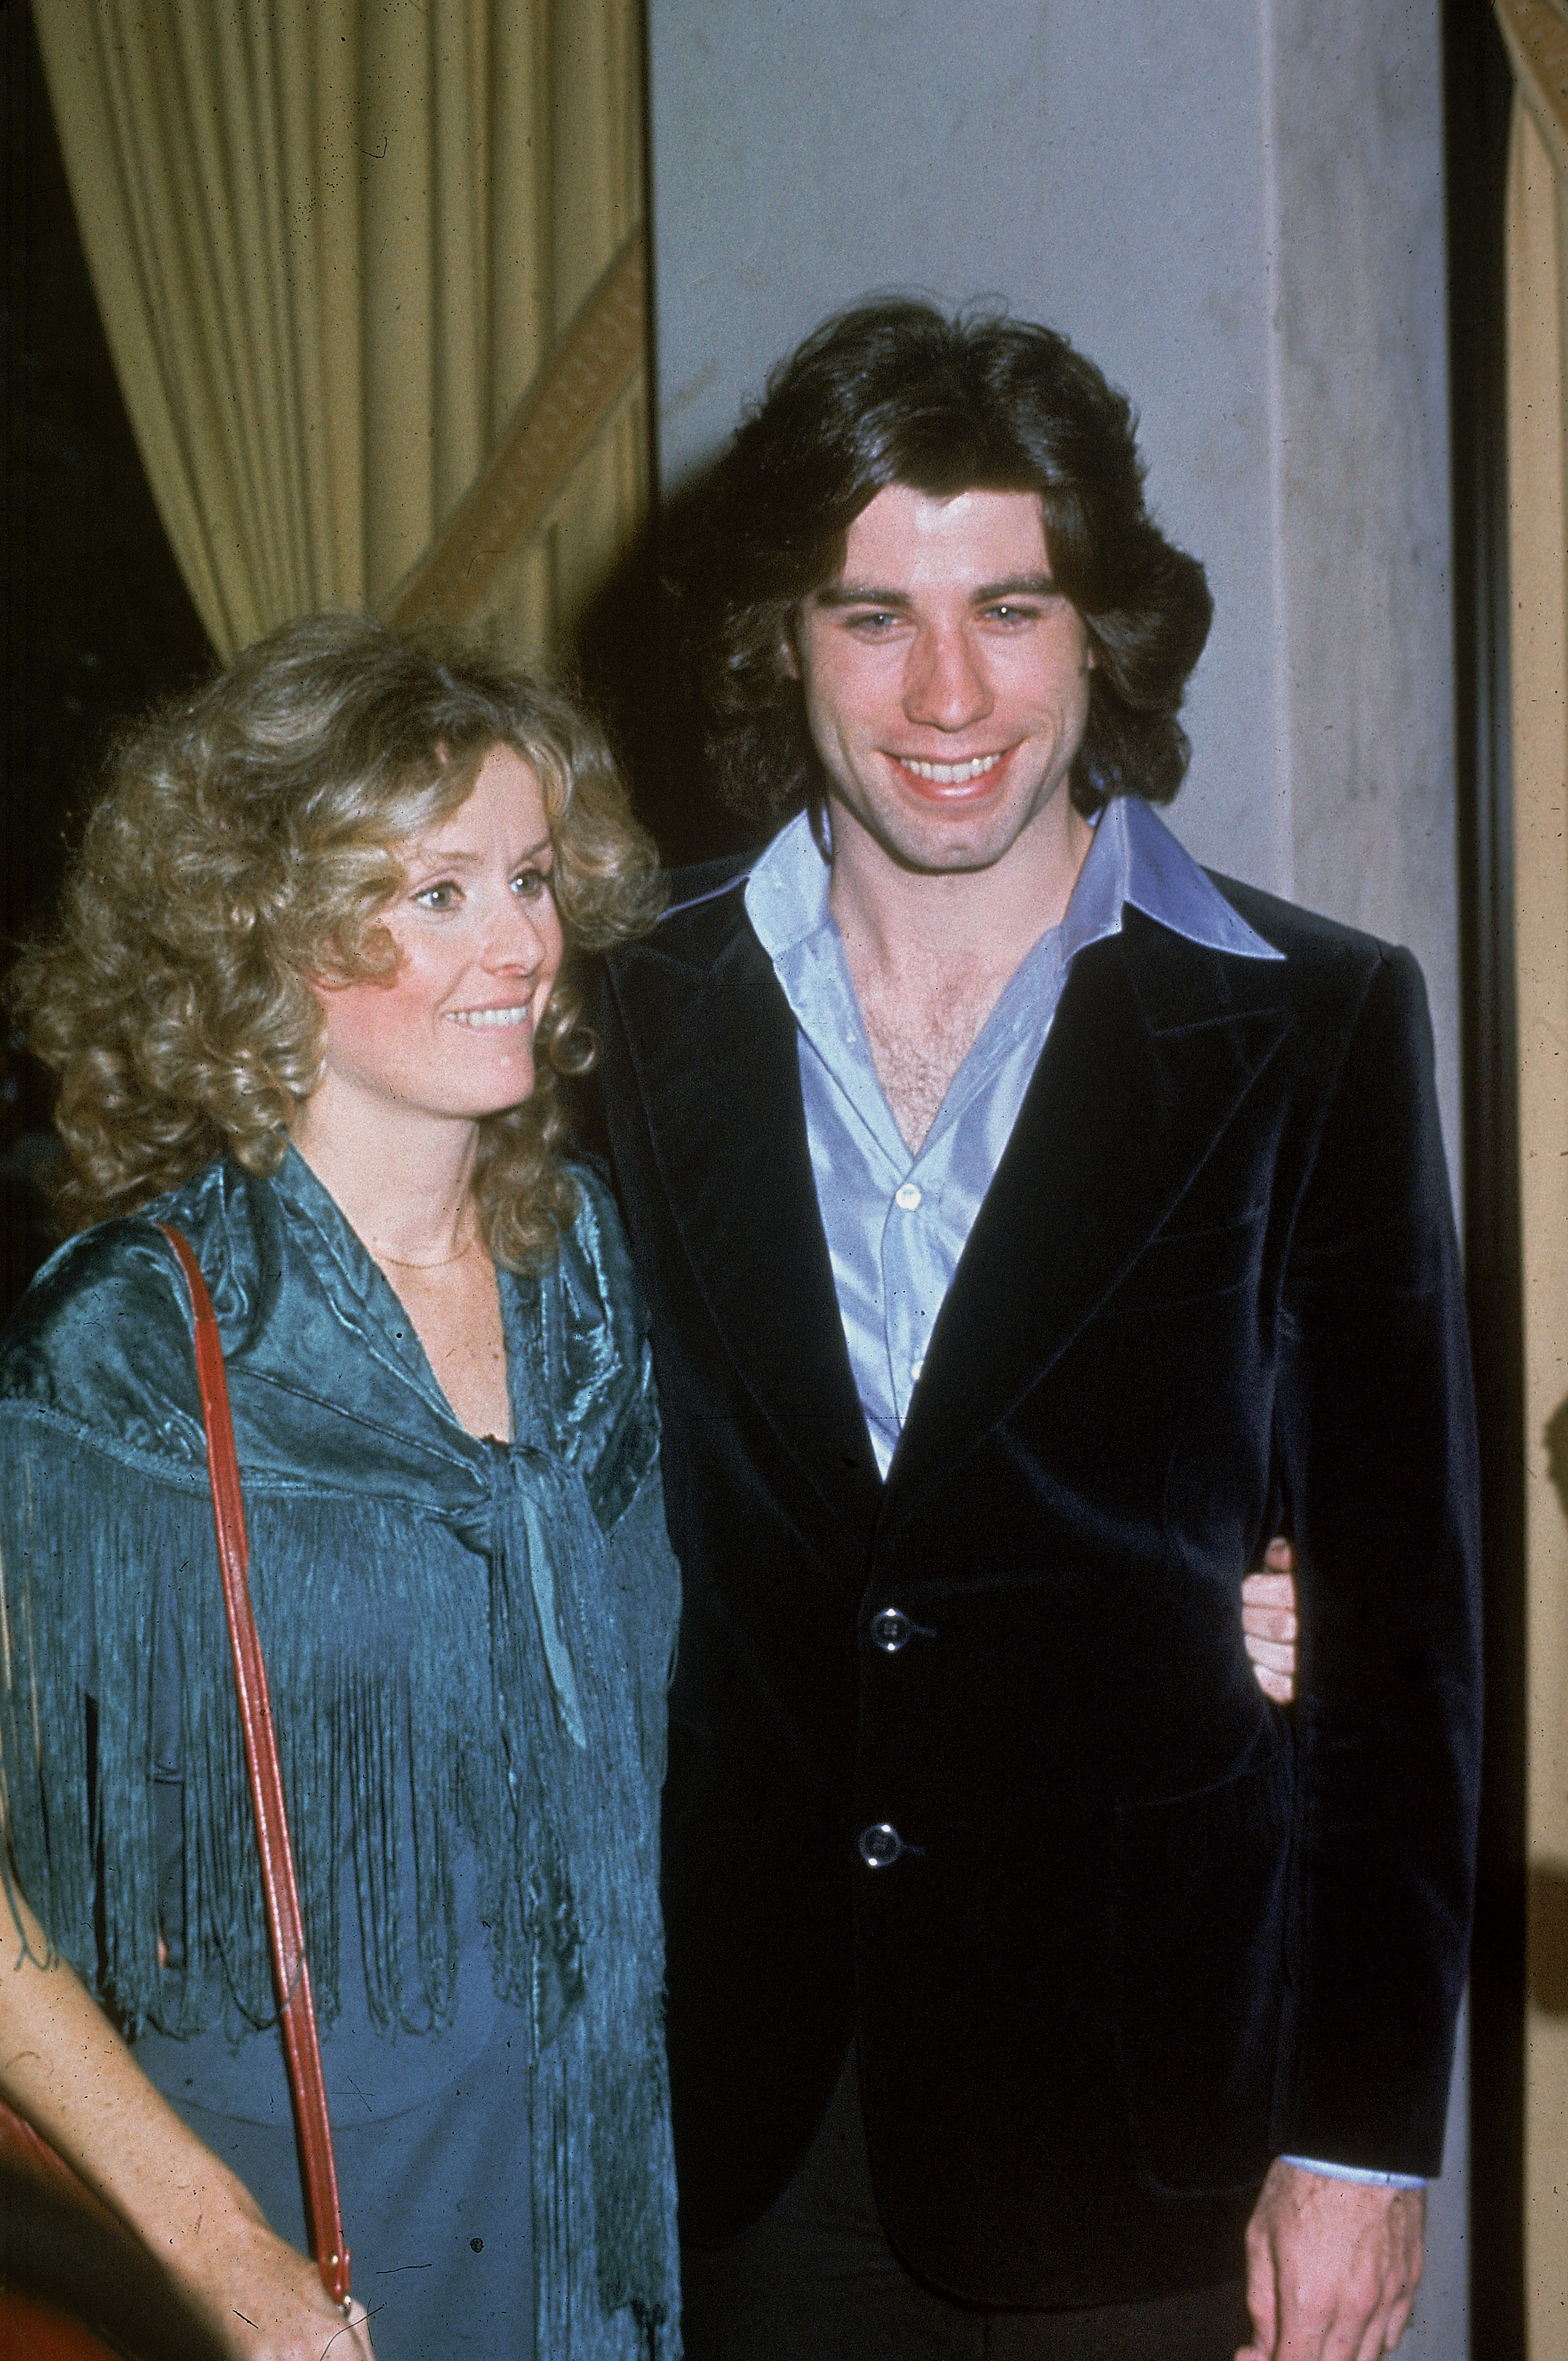 Diana Hyland and John Travolta at the Golden Apple Awards in 1976 | Source: Getty Images